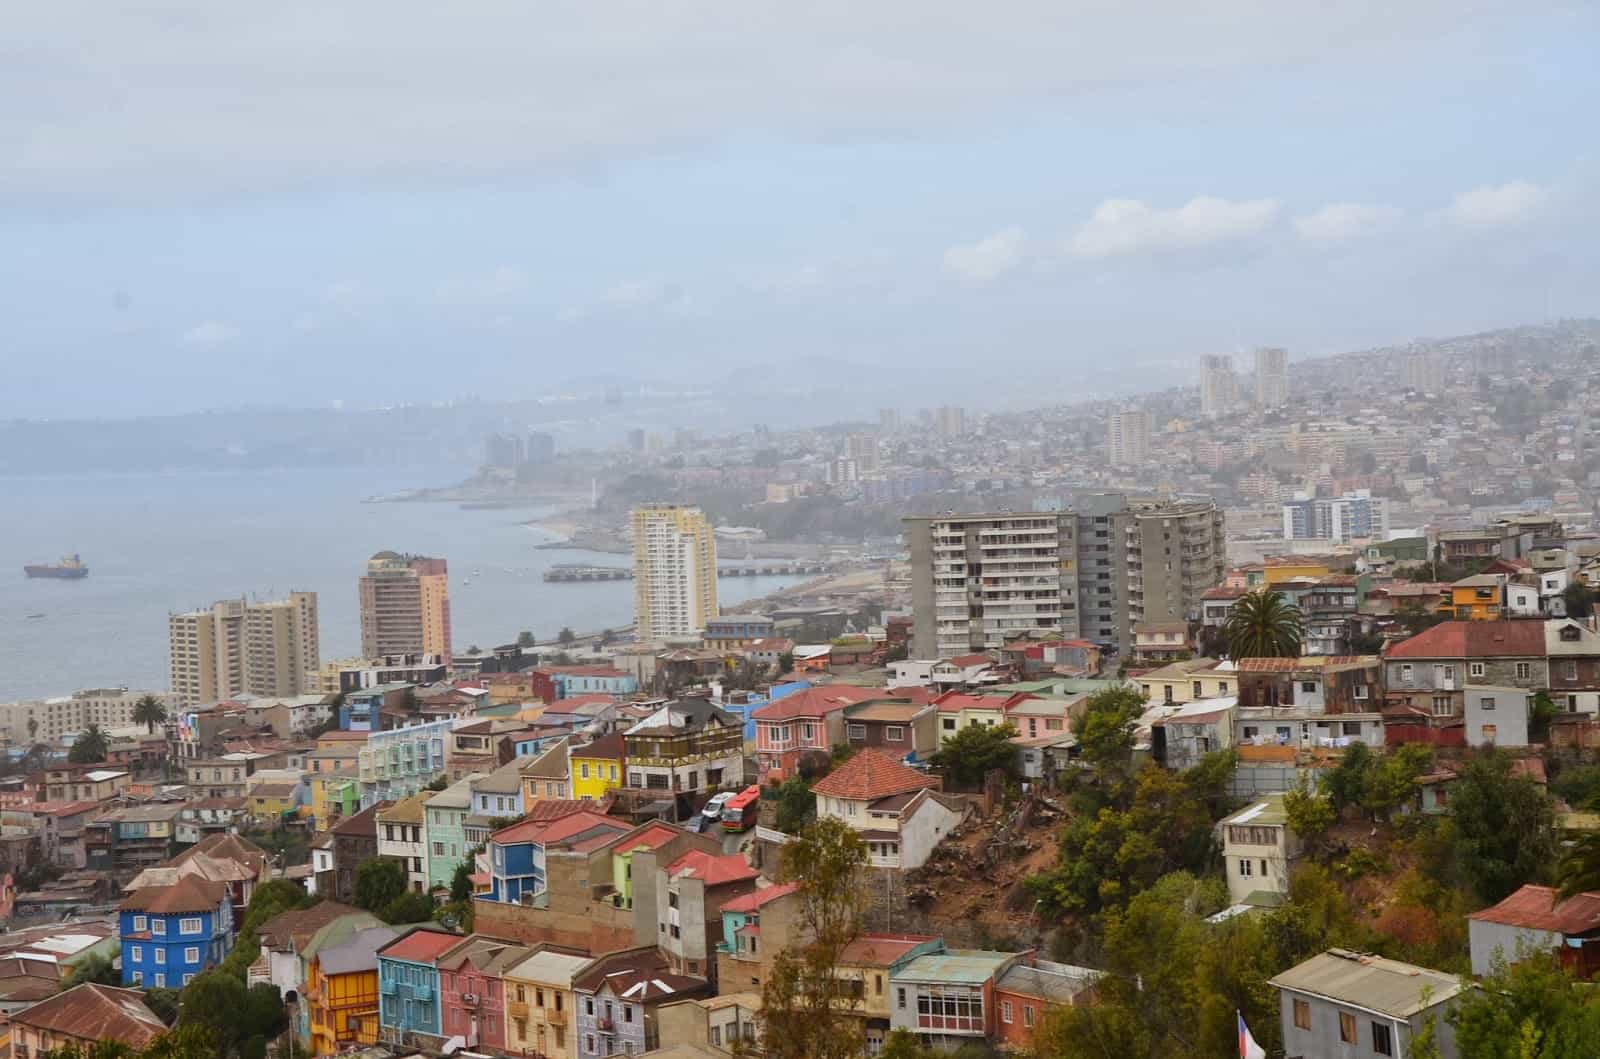 The view from Av. Alemania in Valparaíso, Chile